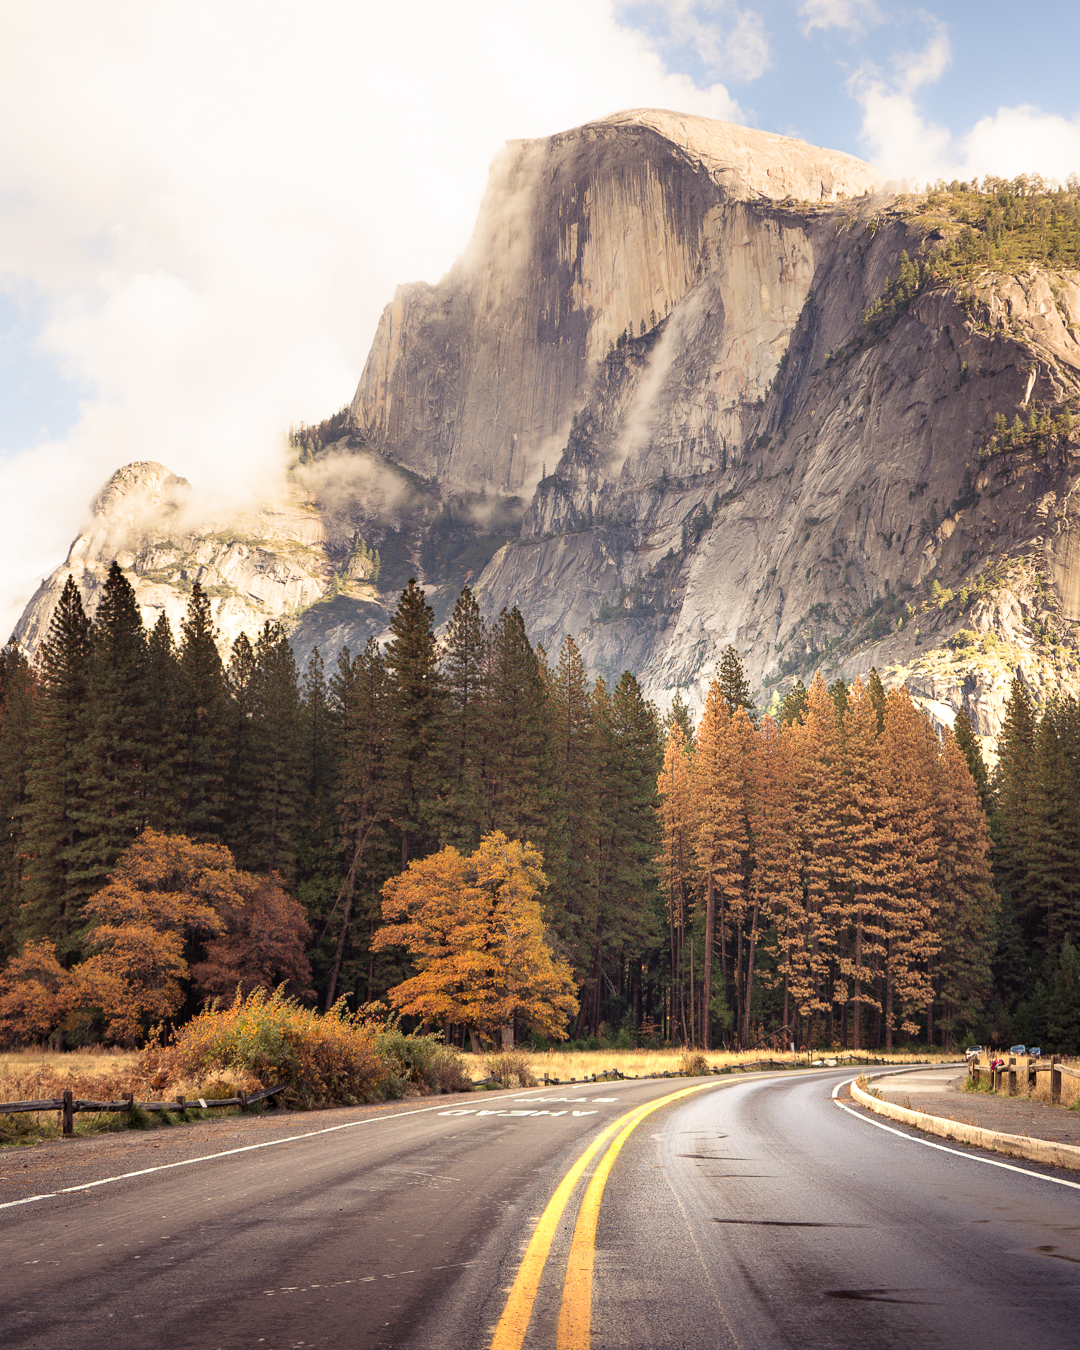 Road shot taken in Yosemite Valley with Half Dome in the distance.